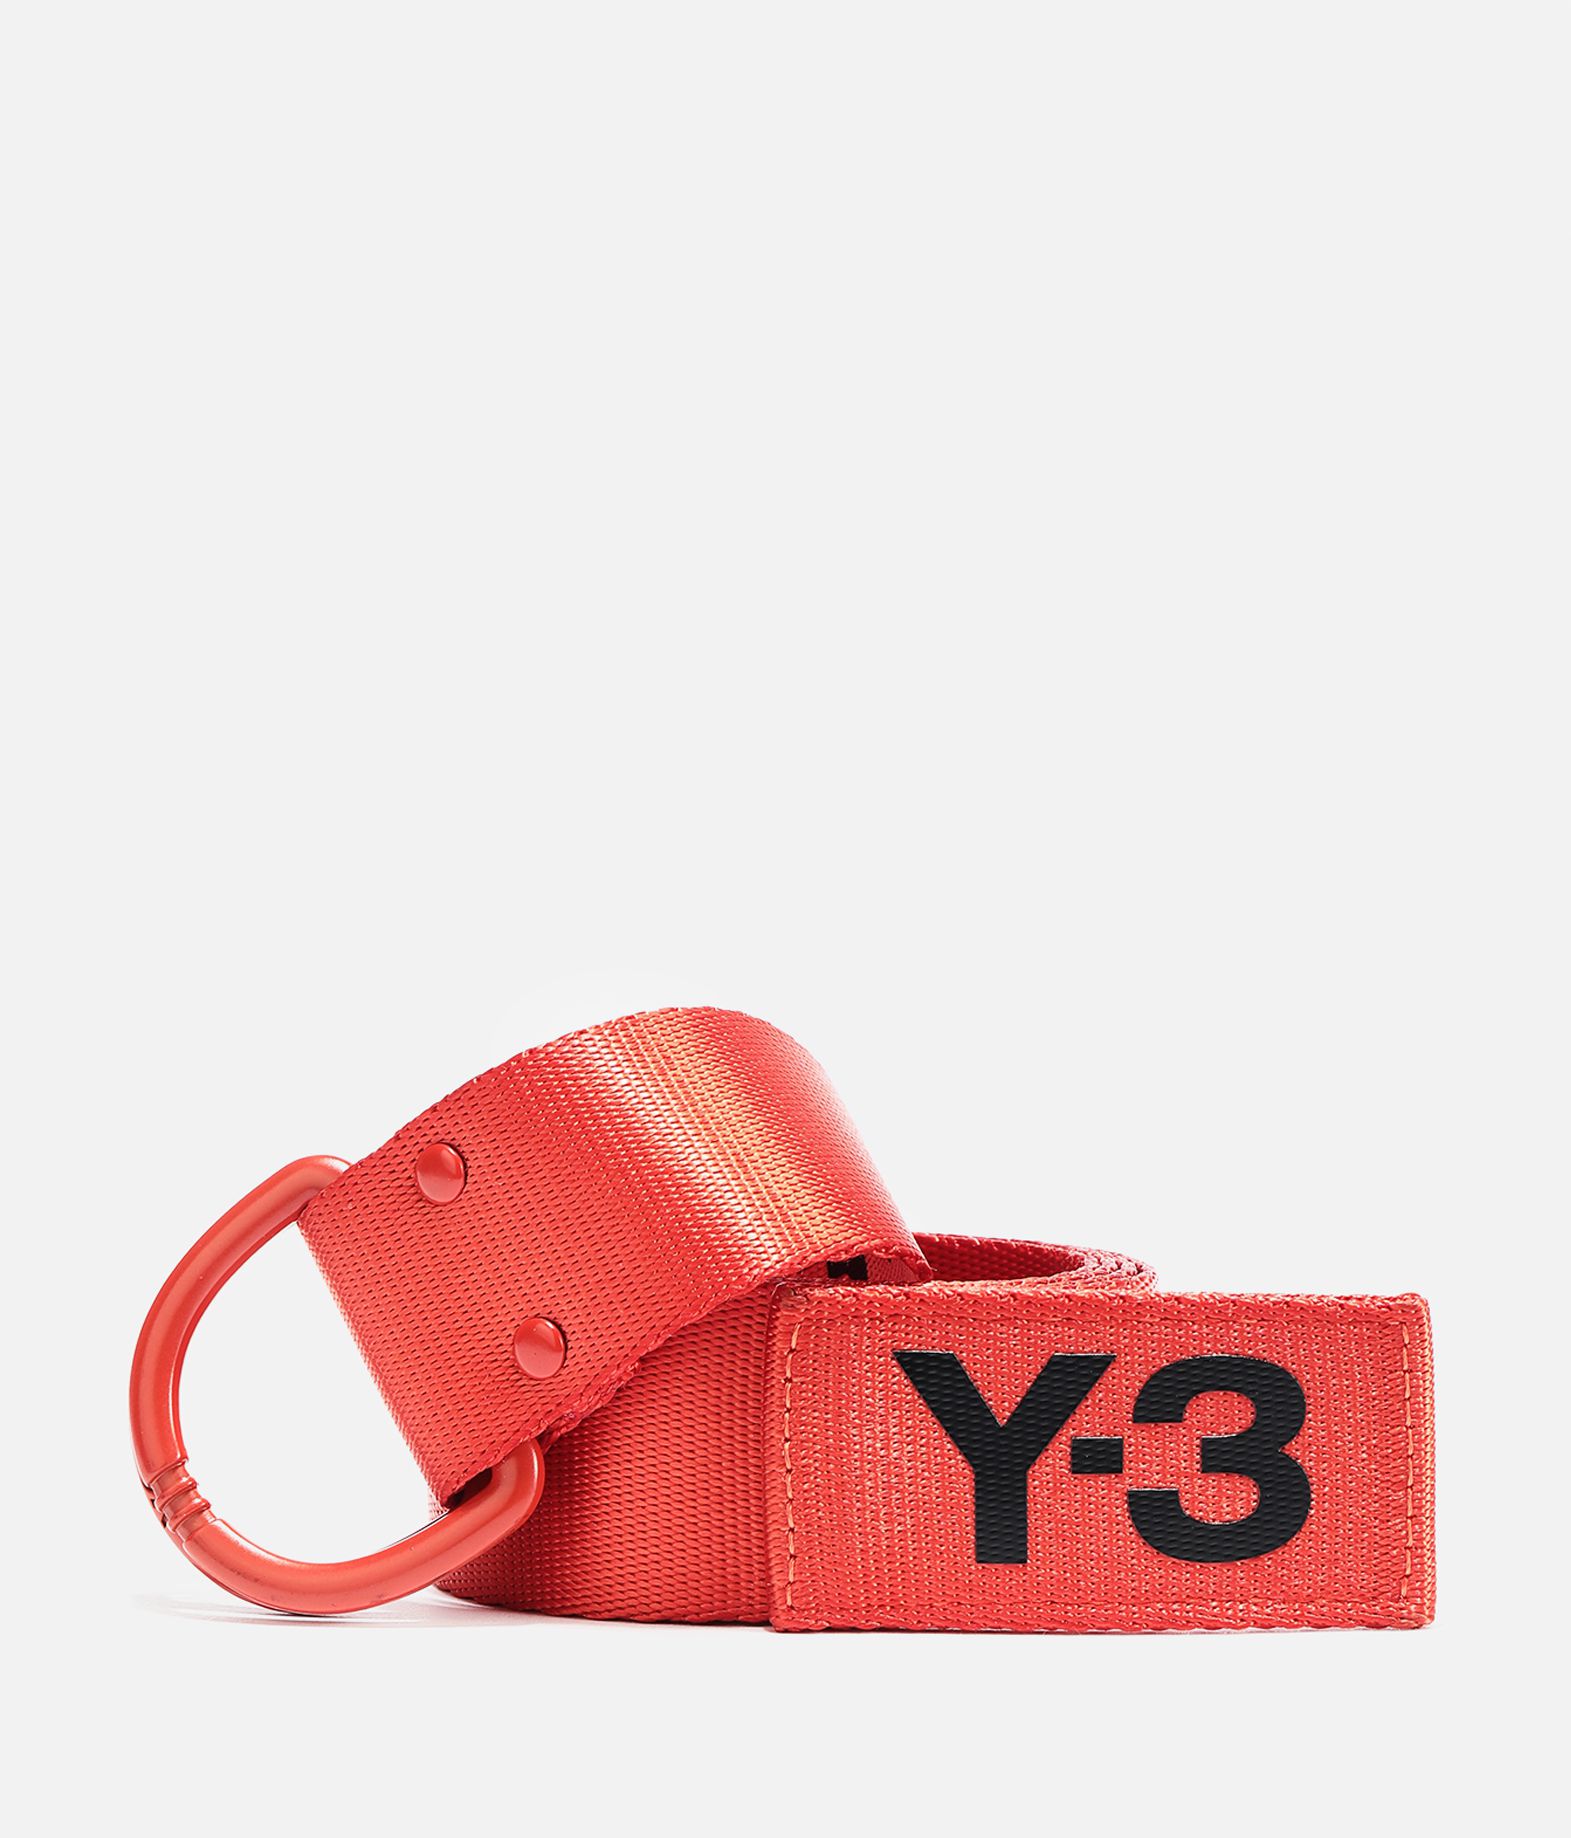 Y3 Belt Red Online Sale, UP TO 50% OFF | www.aramanatural.es